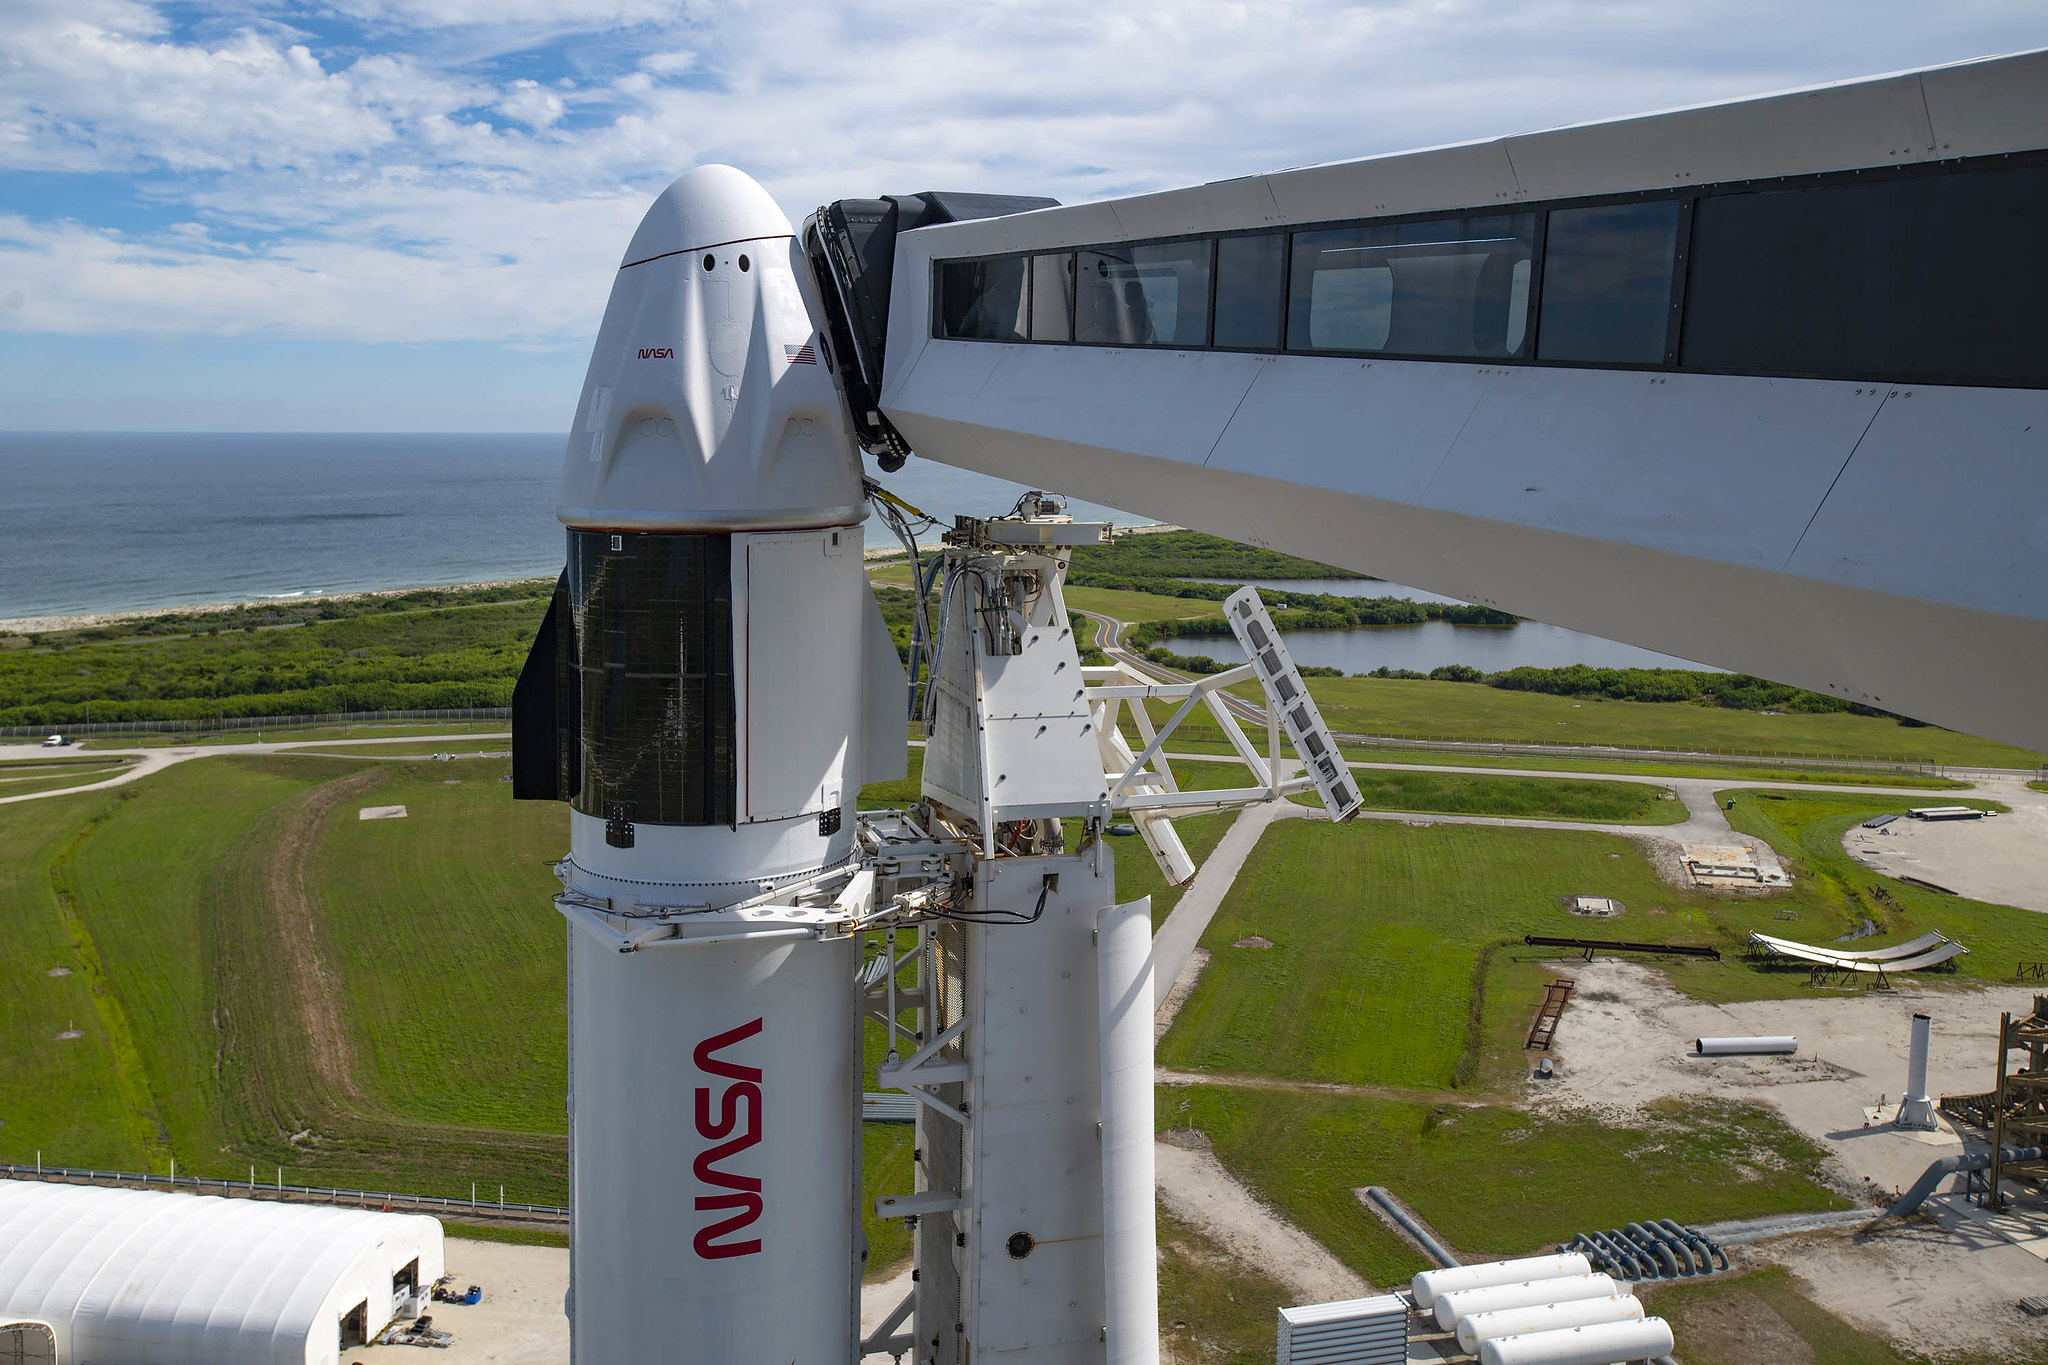 A close-up view of the SpaceX Falcon 9 rocket vertical with the Crew Dragon for the Crew-3 mission at Launch Pad 39A at NASA’s Kennedy Space Center in Florida on Oct. 27, 2021.